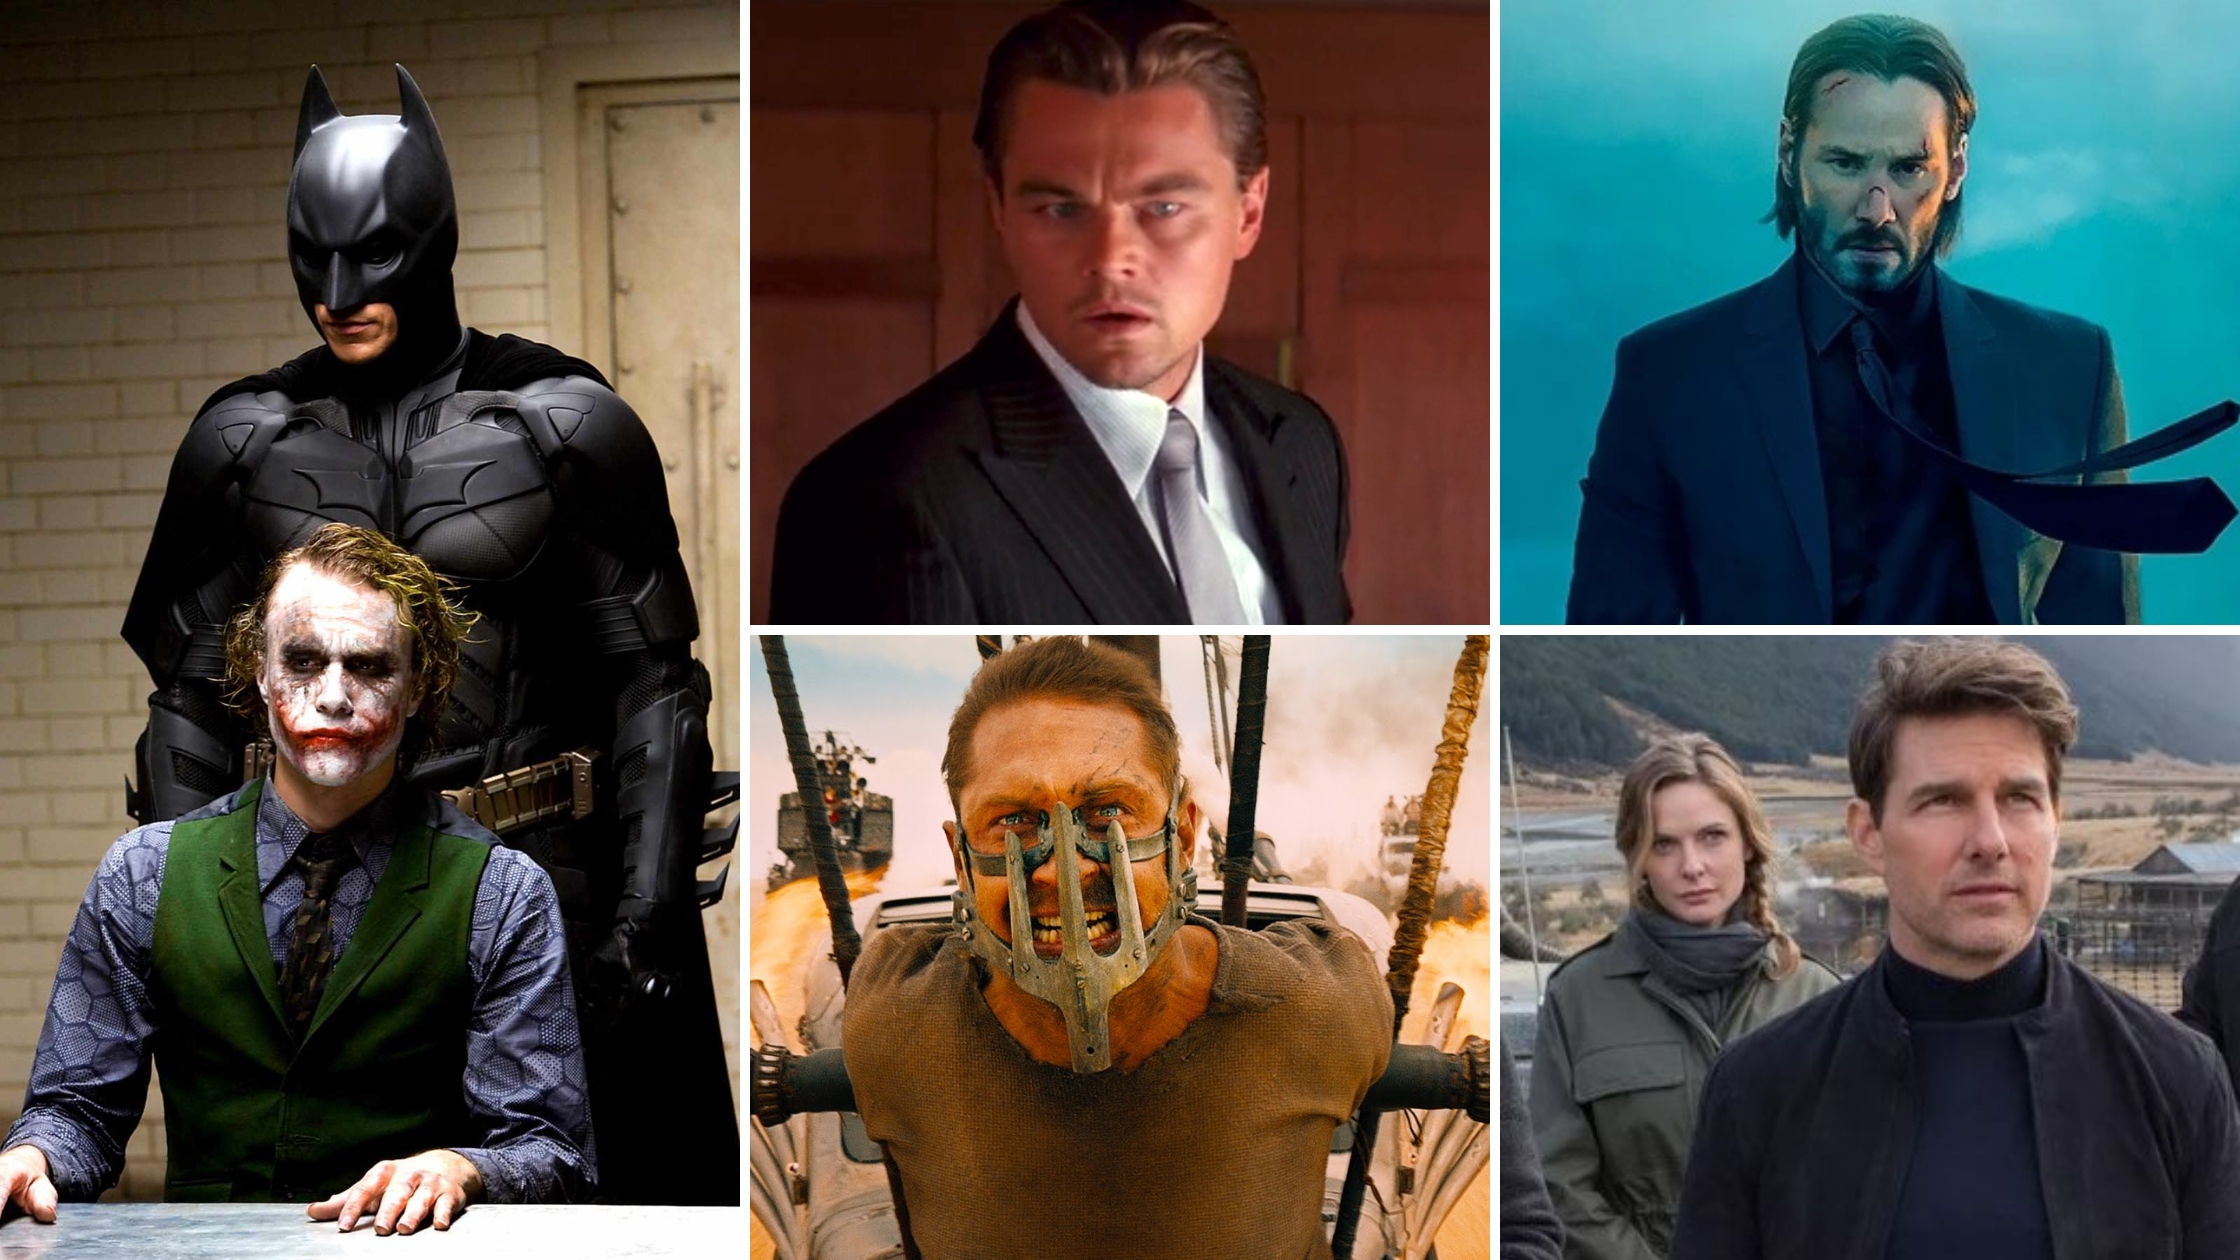 The Top 15 Action Movies That Get Your Adrenaline Pumping